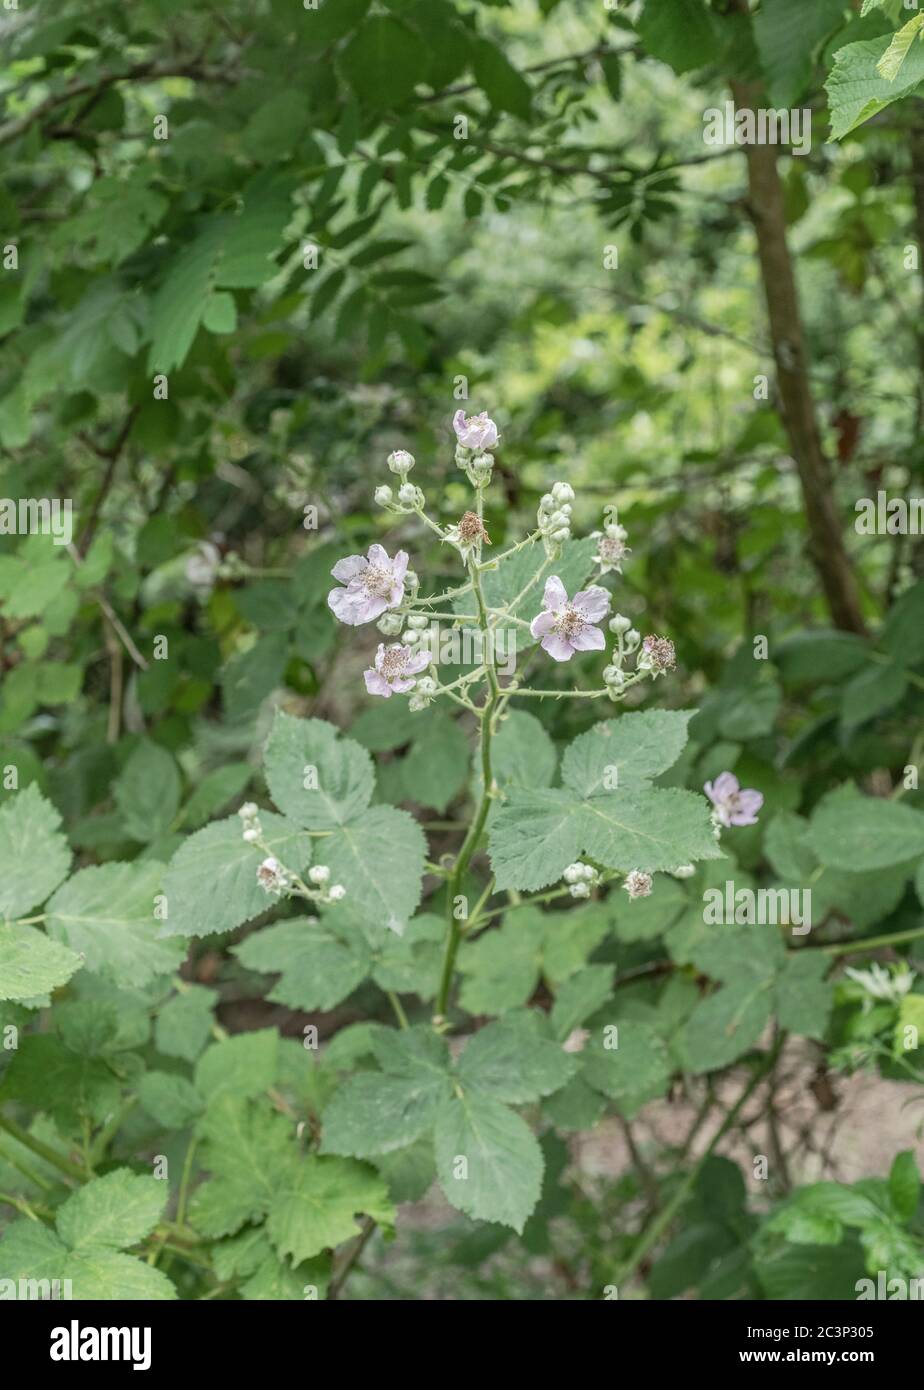 Pinky-white flower & flower buds of Bramble / Rubus fruticosus in UK hedgerow. Source of blackberries, obviously, and once used as a medicinal plant. Stock Photo